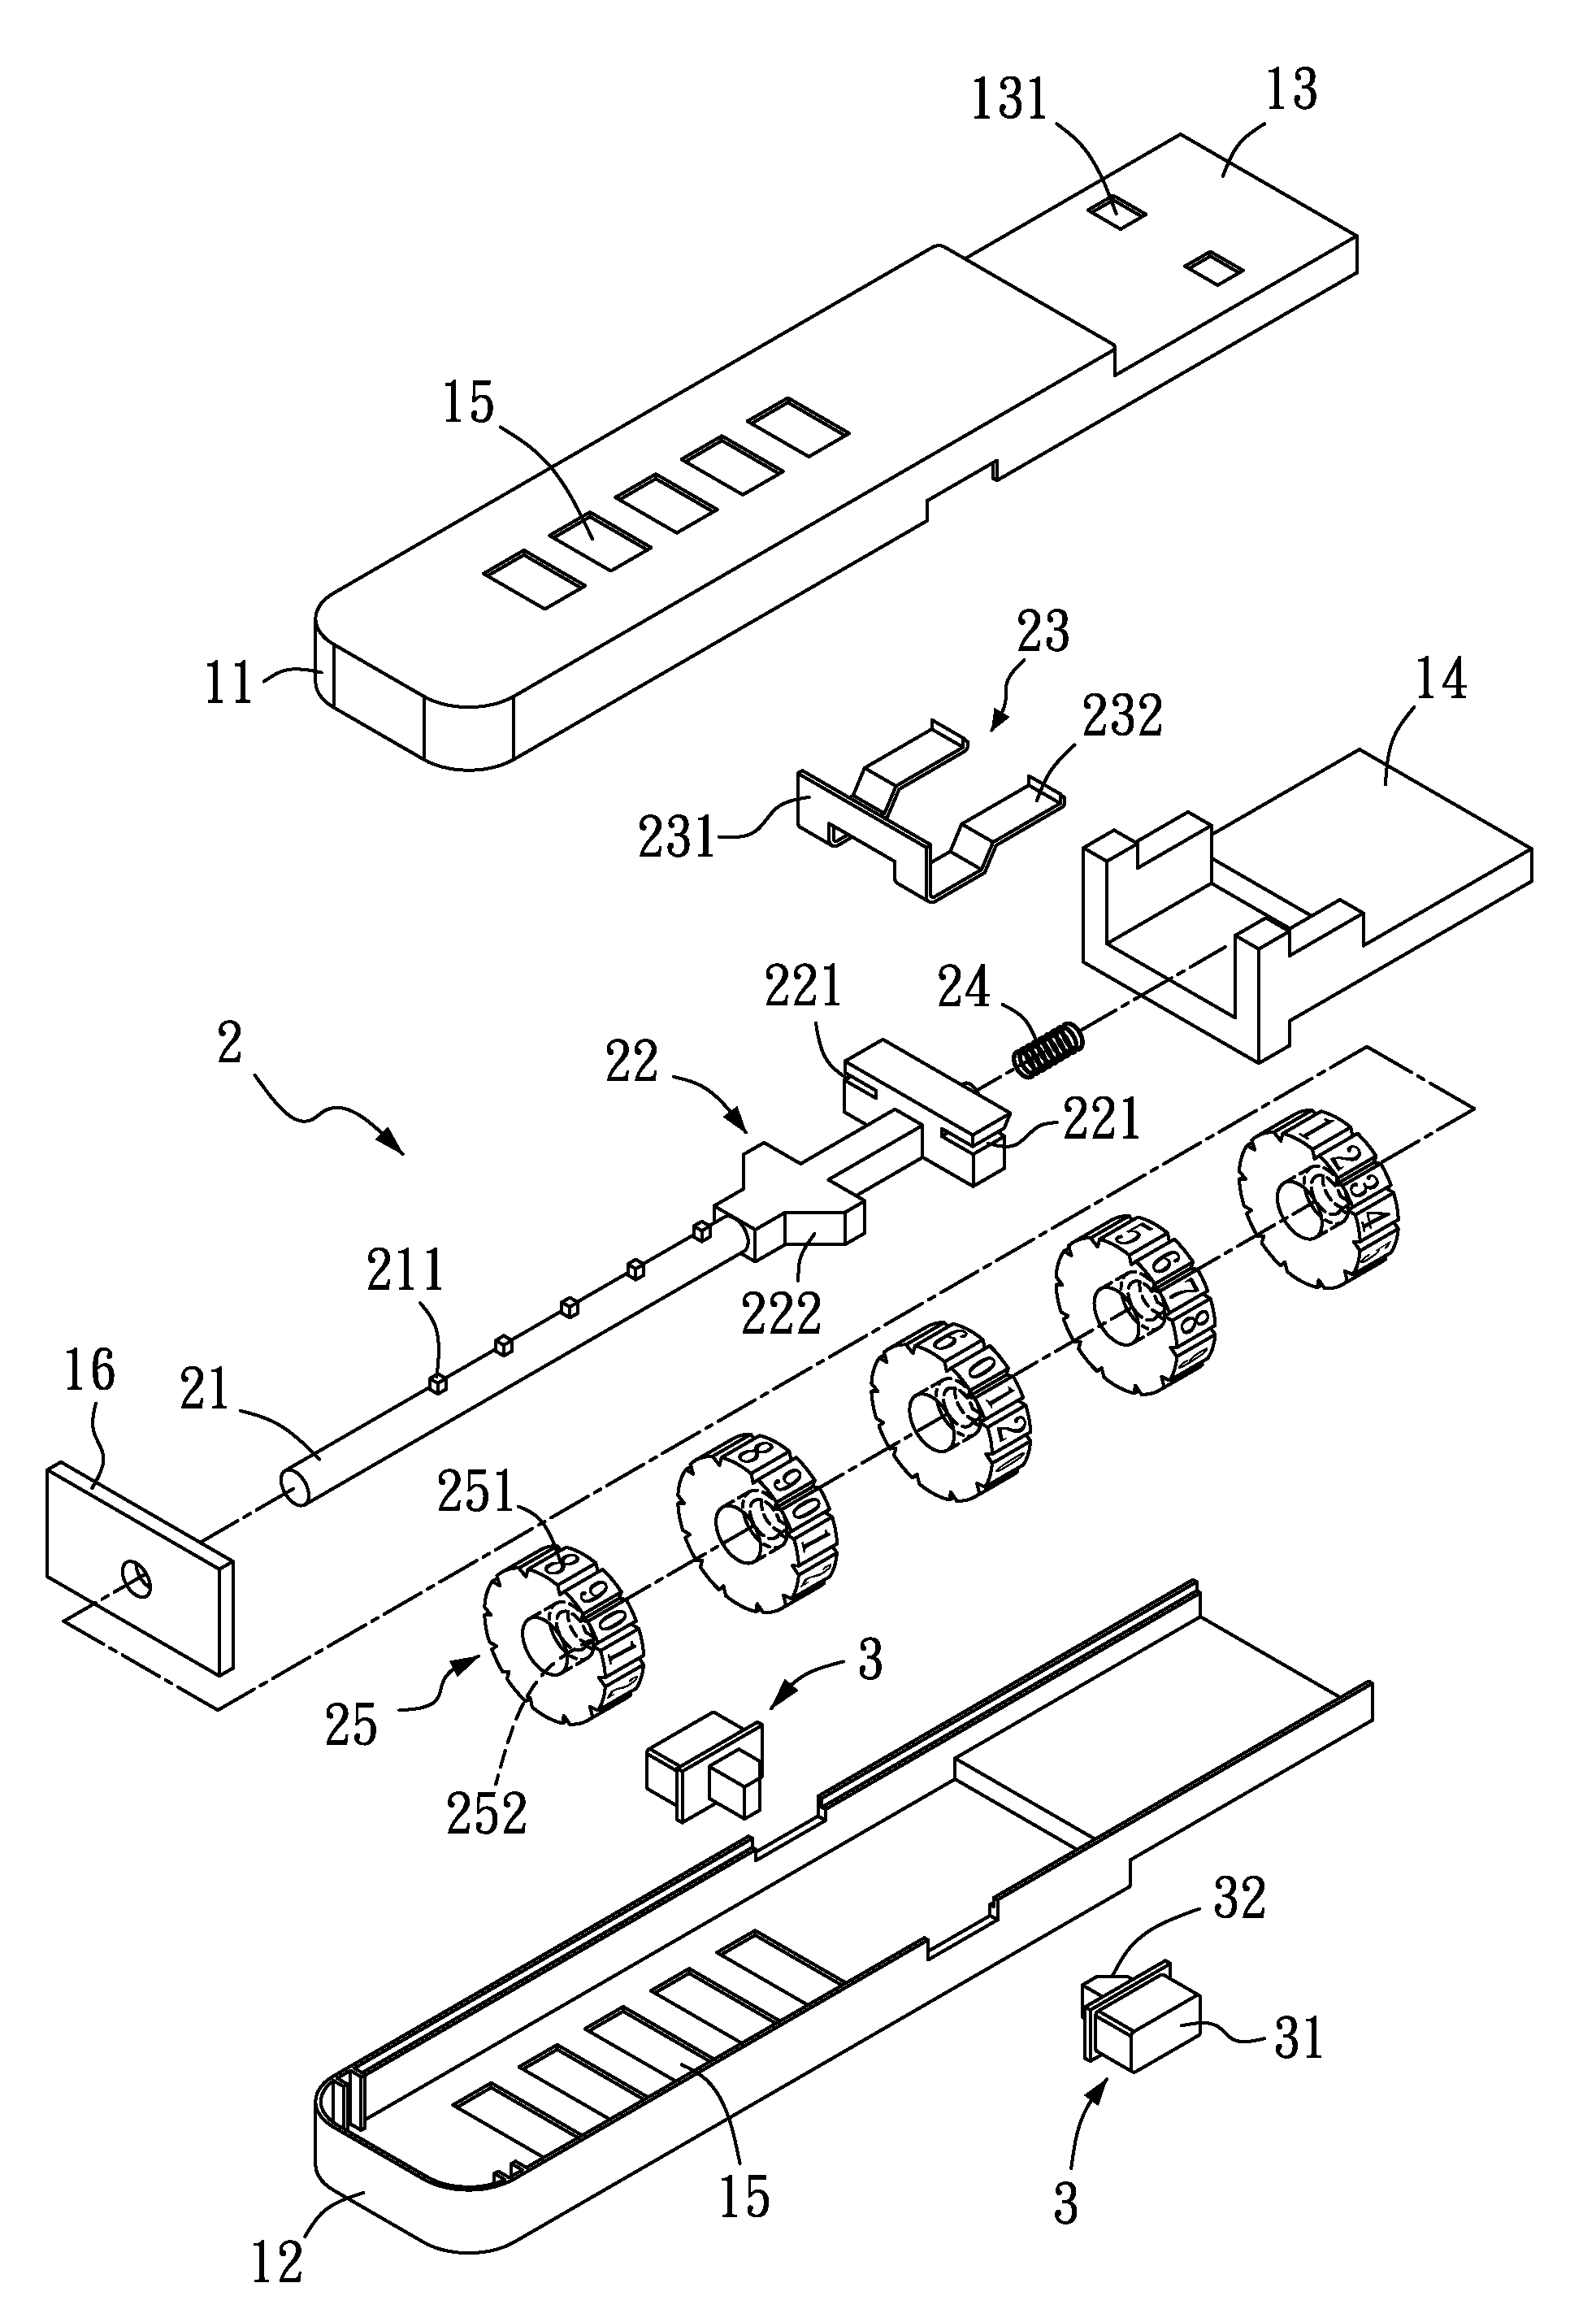 Locking device for a connecting port on a computer